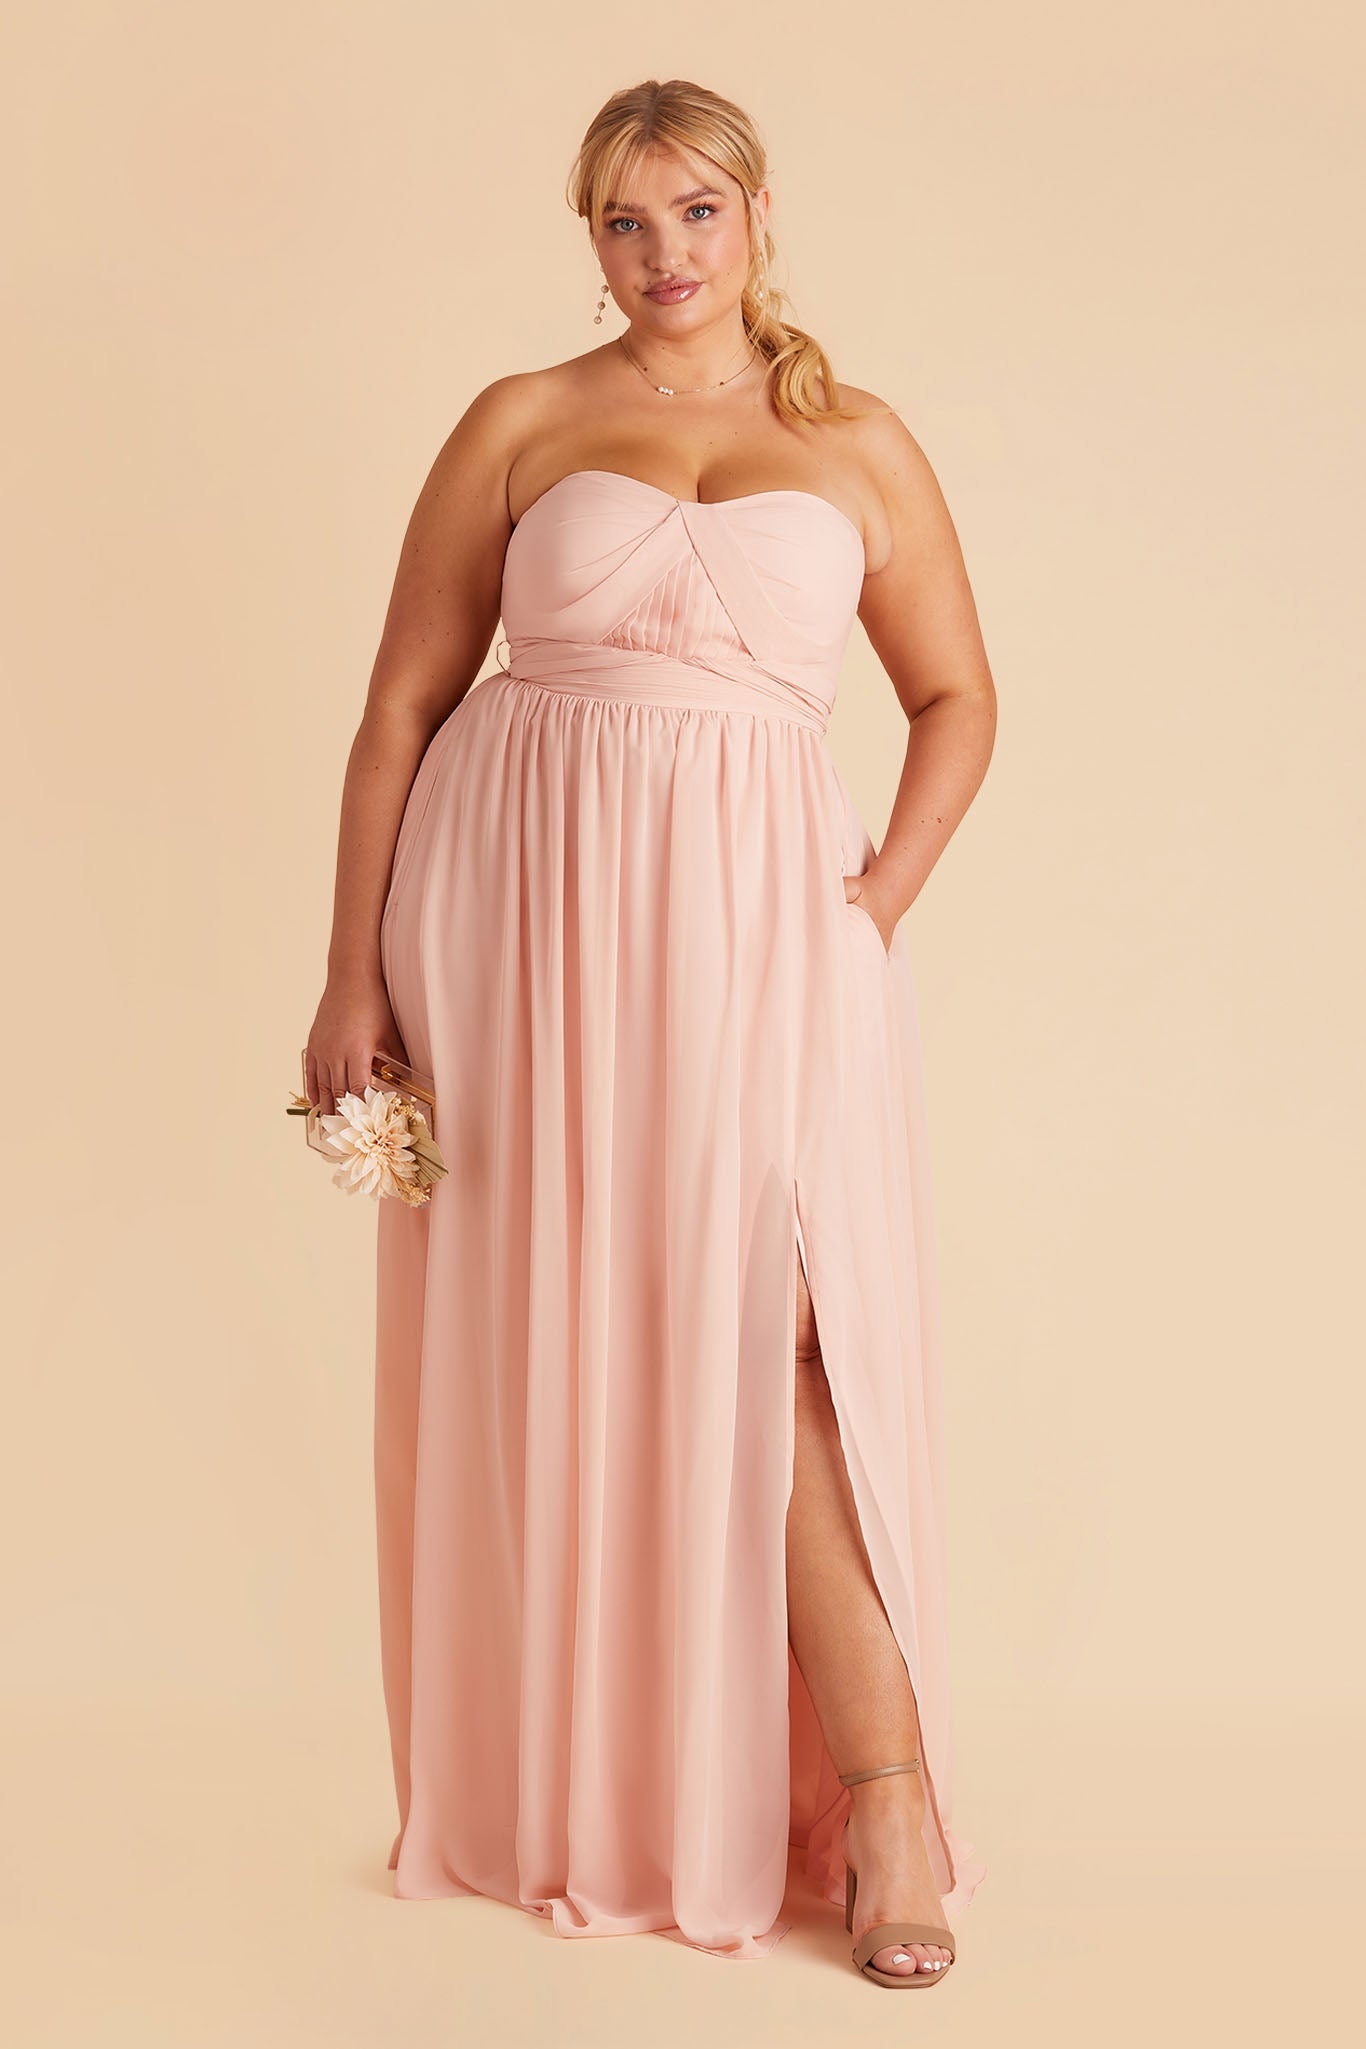 Grace plus size convertible bridesmaid dress in Blush Pink Chiffon by Birdy Grey, front view